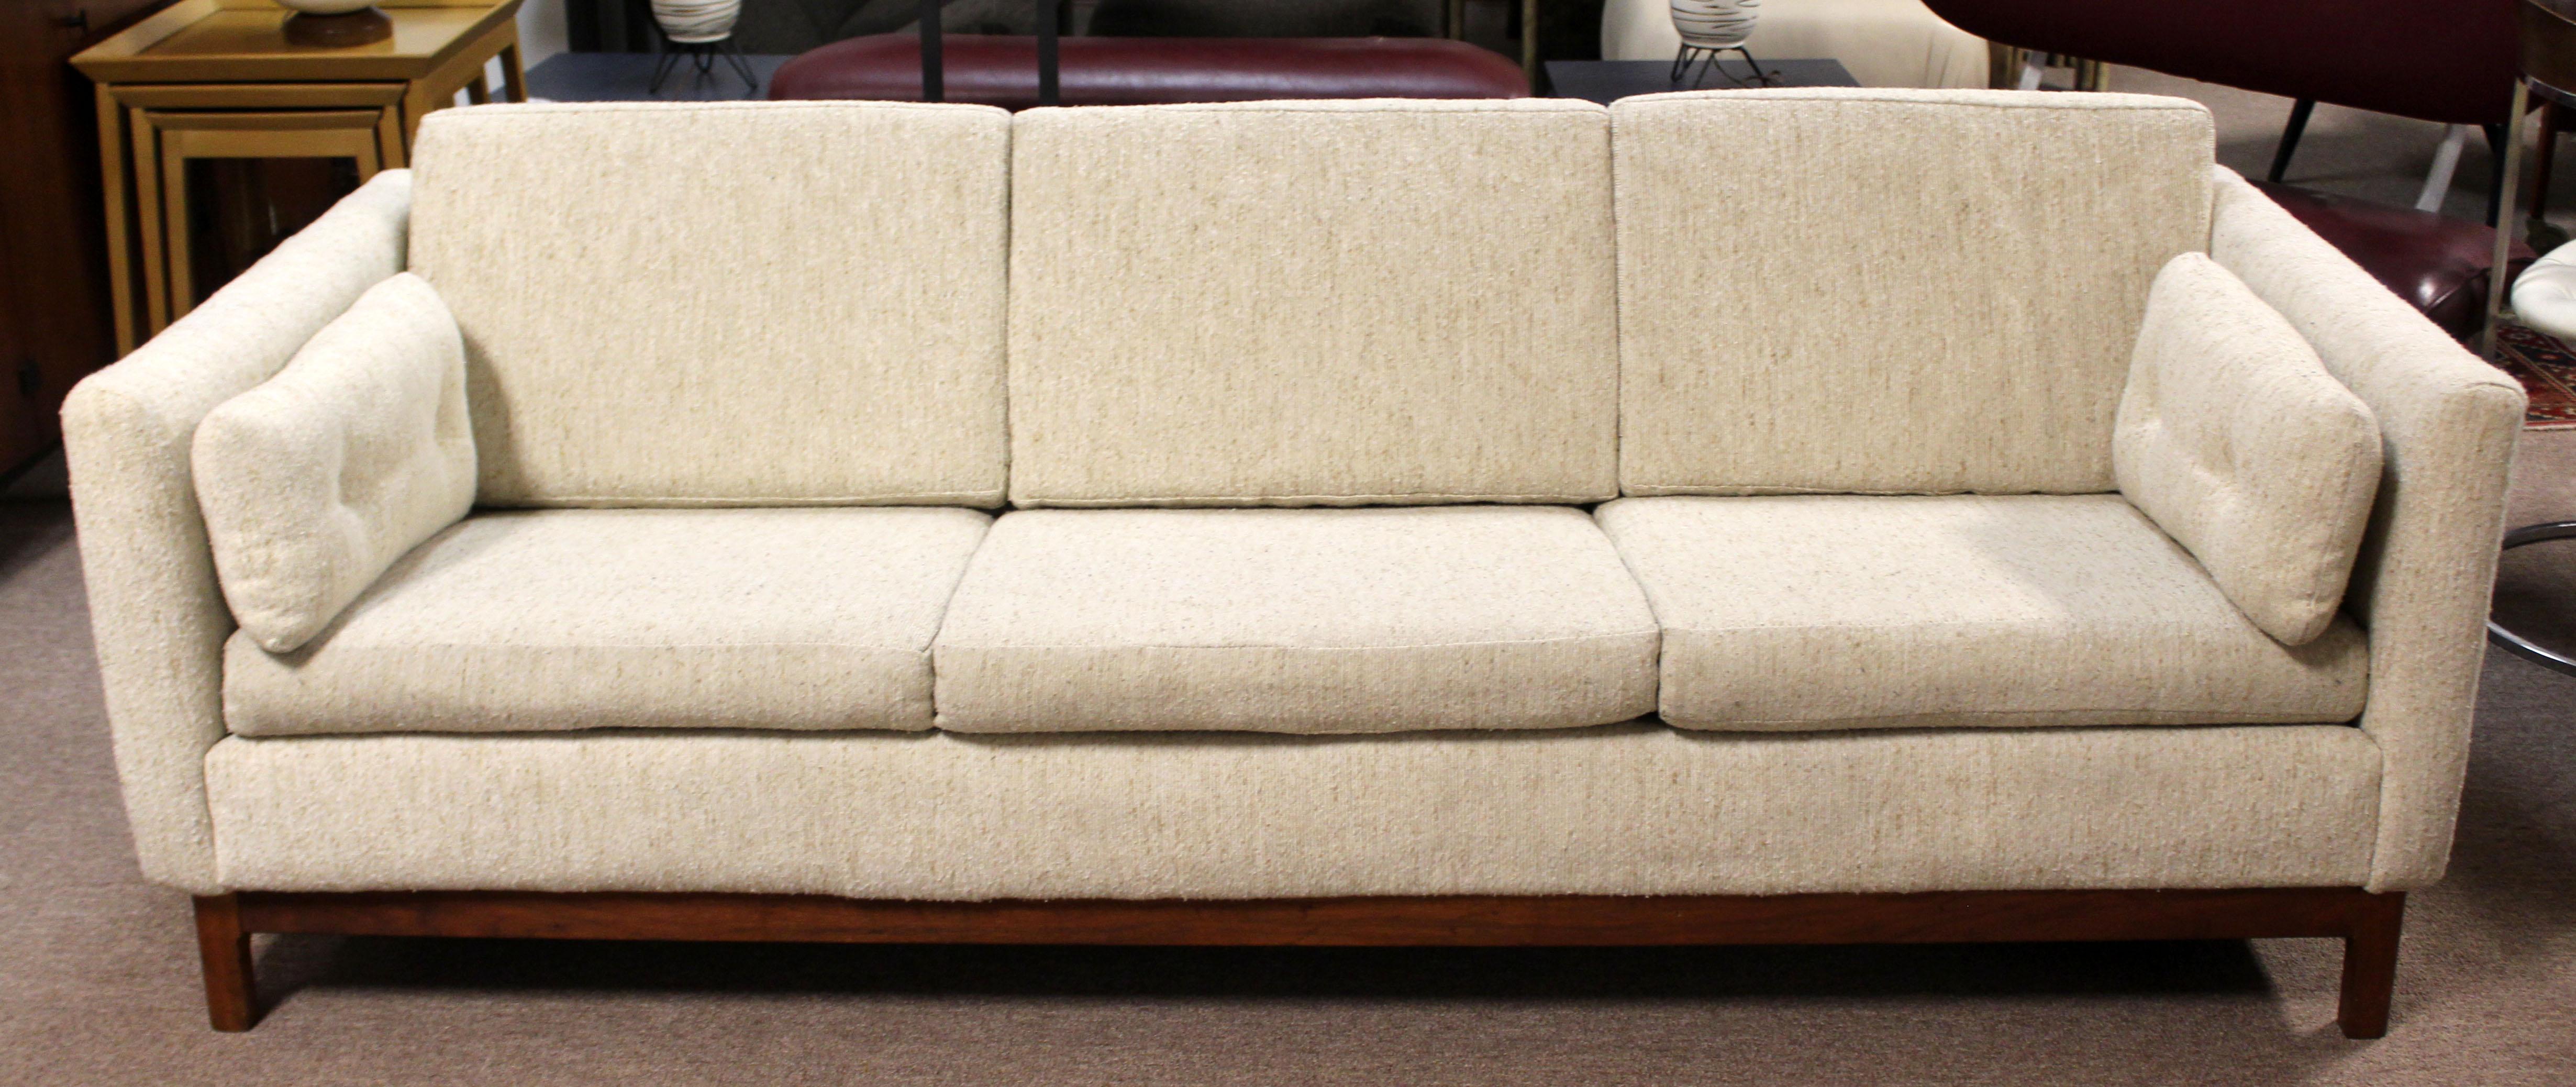 For your consideration is an incredible, three-seat sofa, on a beautiful walnut base, by DUX, circa 1960s. In excellent condition. The dimensions are 83